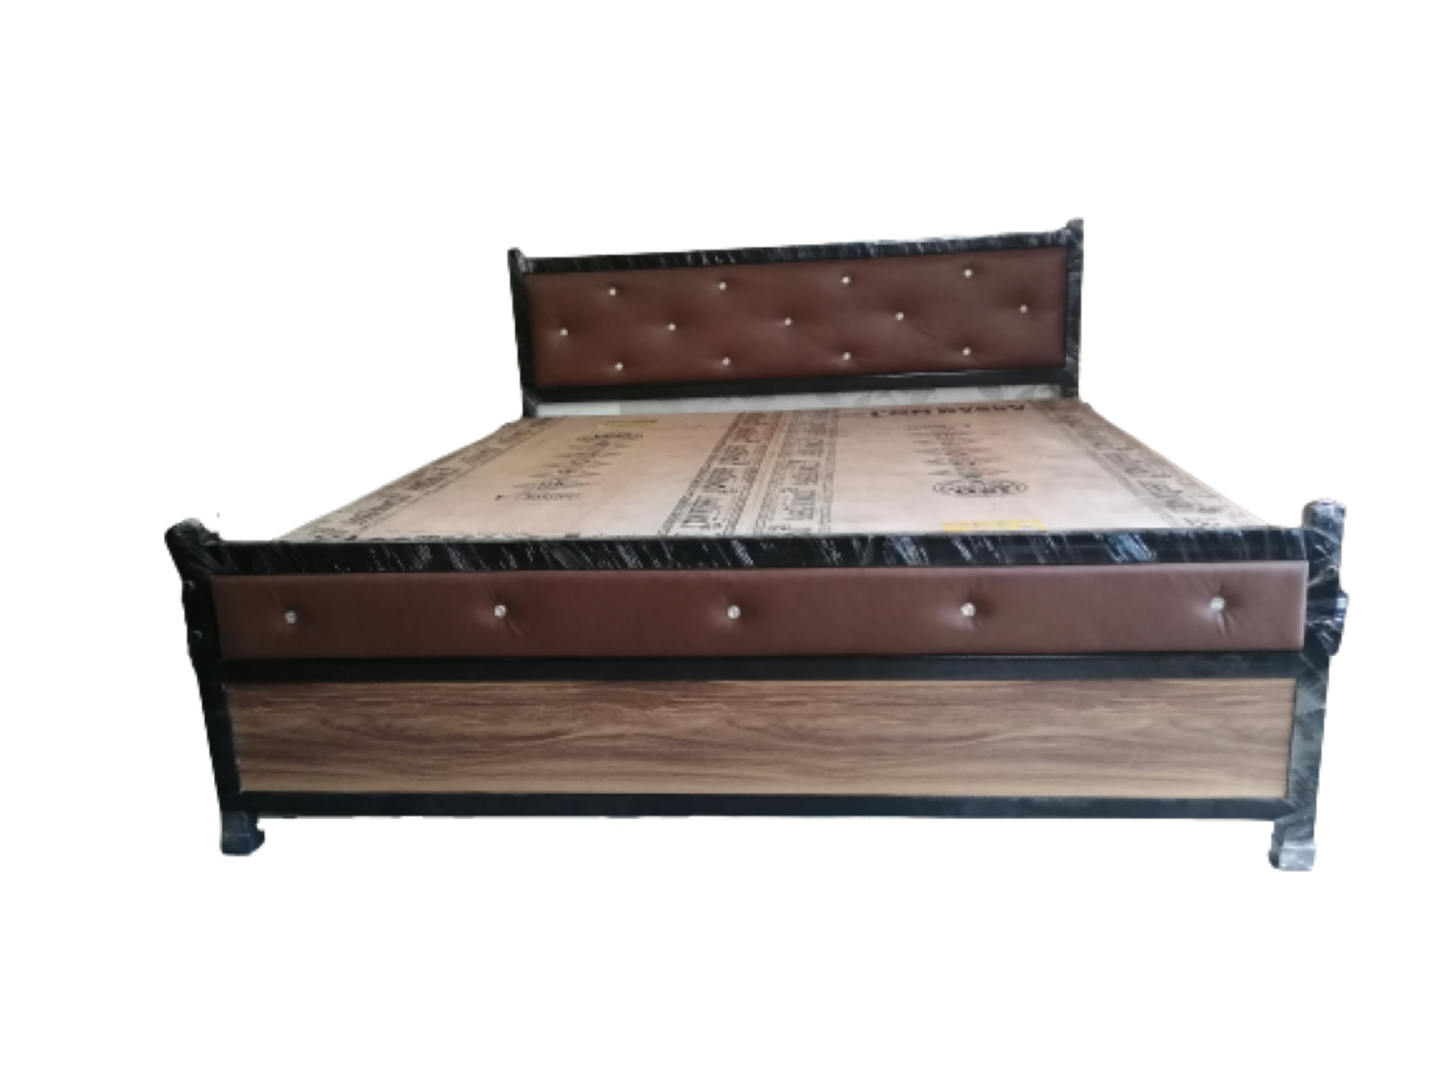 Bowzar NM King Size Bed 6X6.5 Feet Metal Bed Heavy Quality Brown